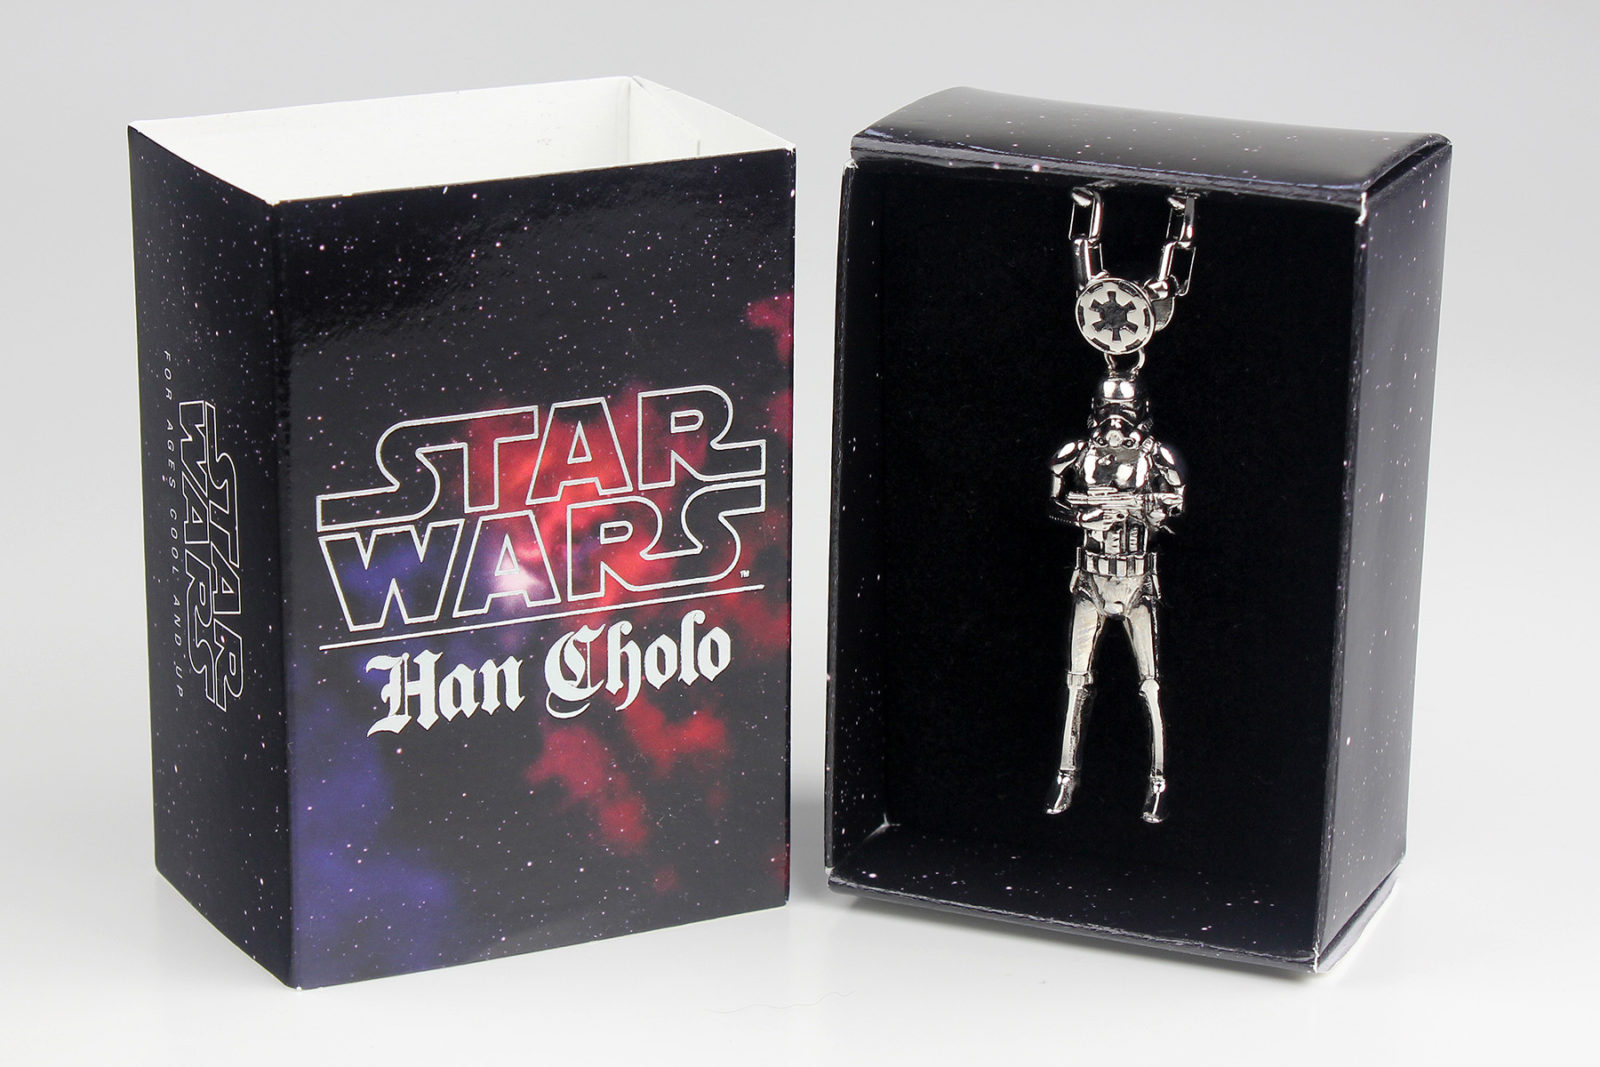 Han Cholo x Star Wars Stormtrooper stainless steel necklace